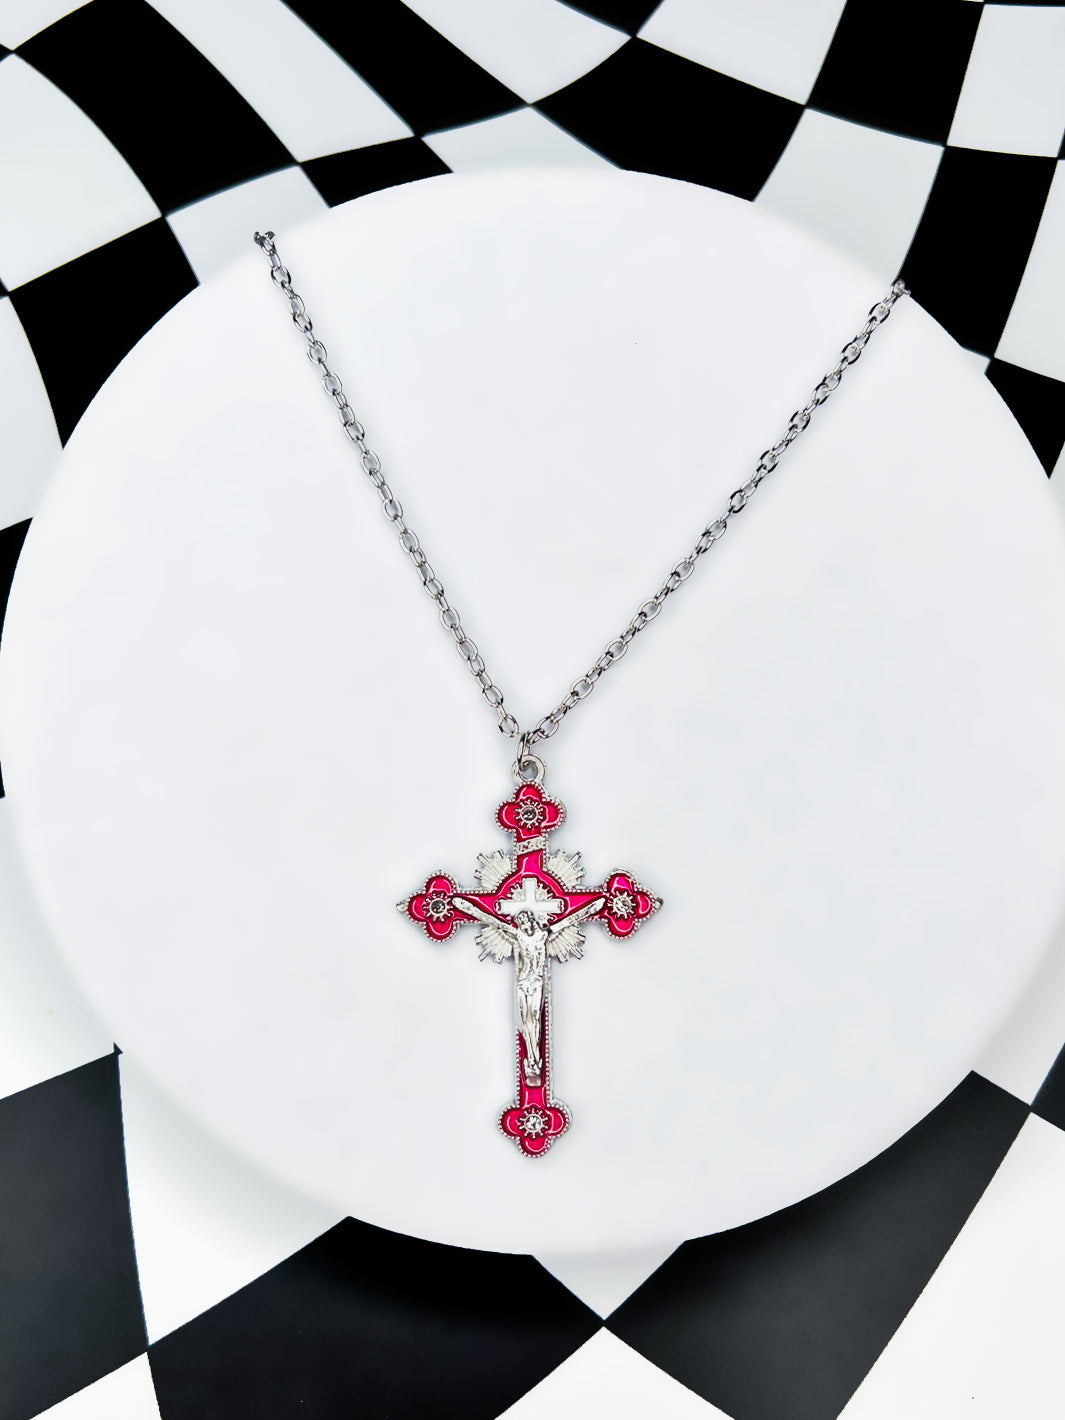 RITUAL CROSS NECKLACE - PINK